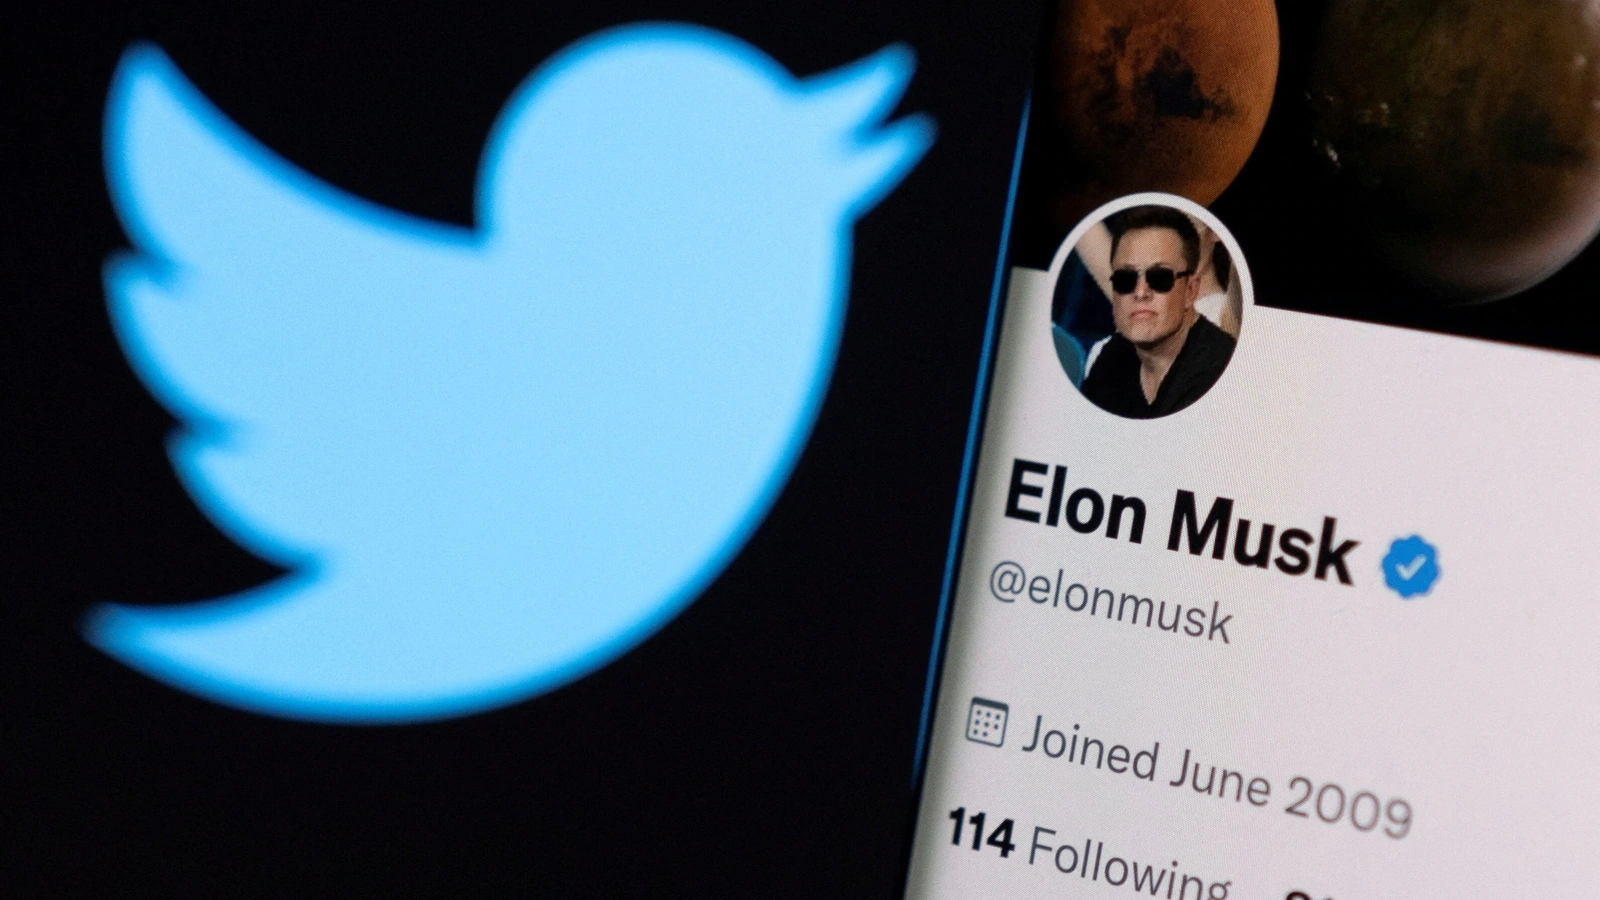 Explained: What Twitter’s ‘poison pill’ is supposed to do